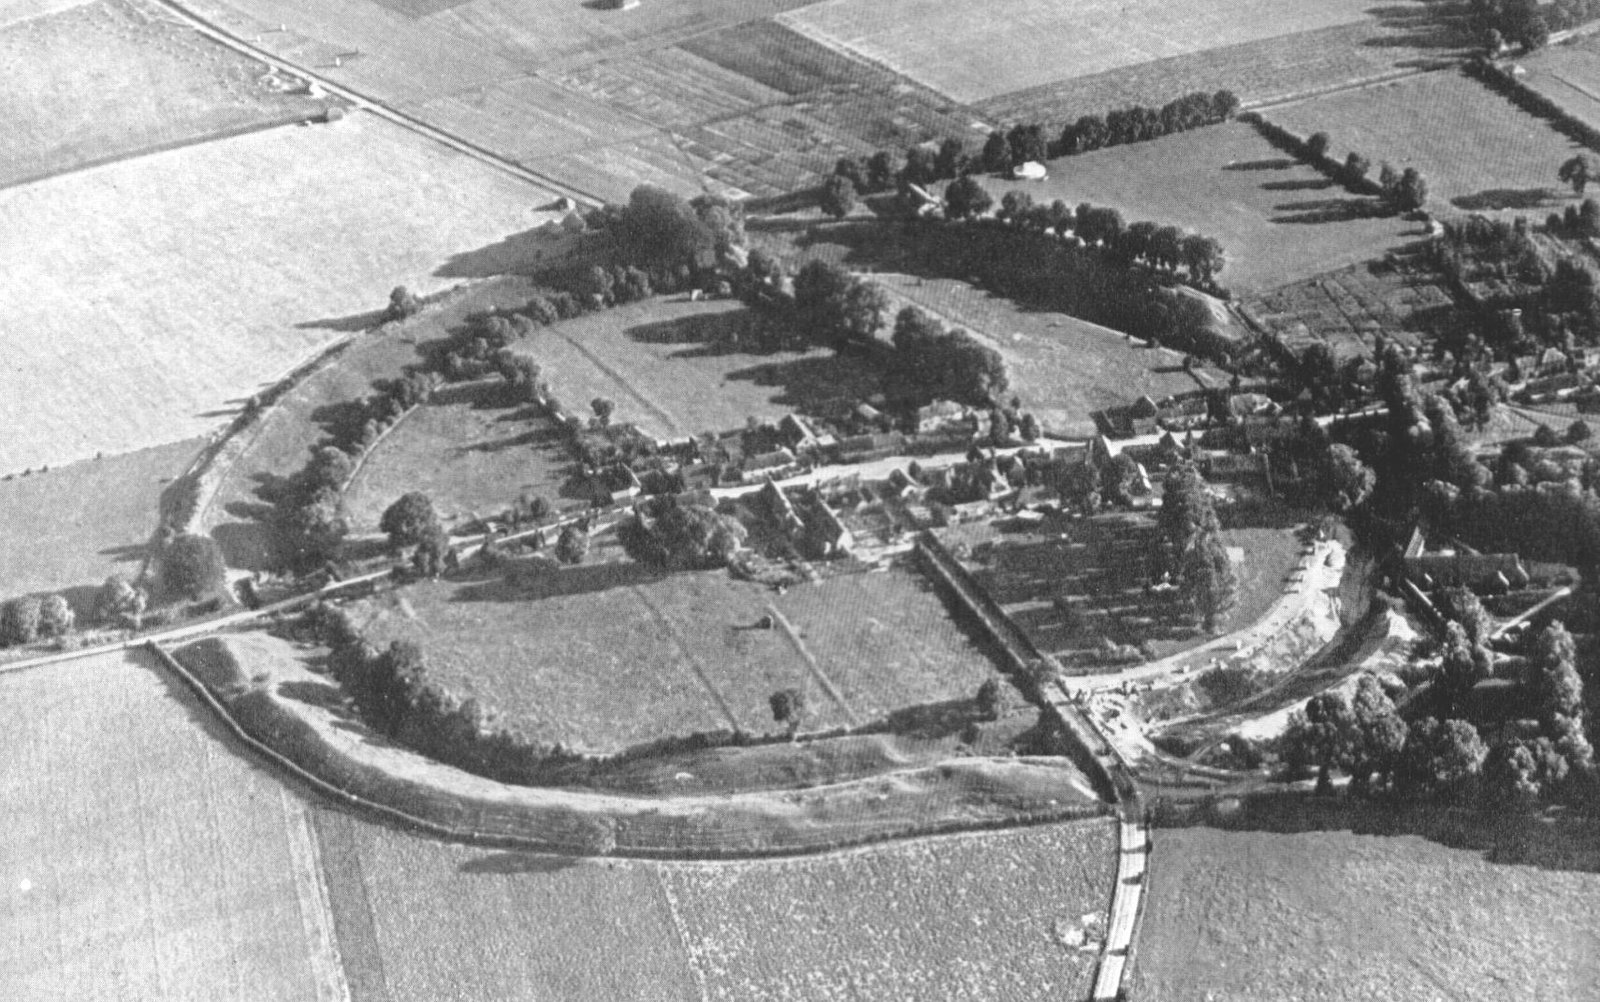 An aerial view of Avebury stone circle and henge. in monochrome, taken shortly after world war two.